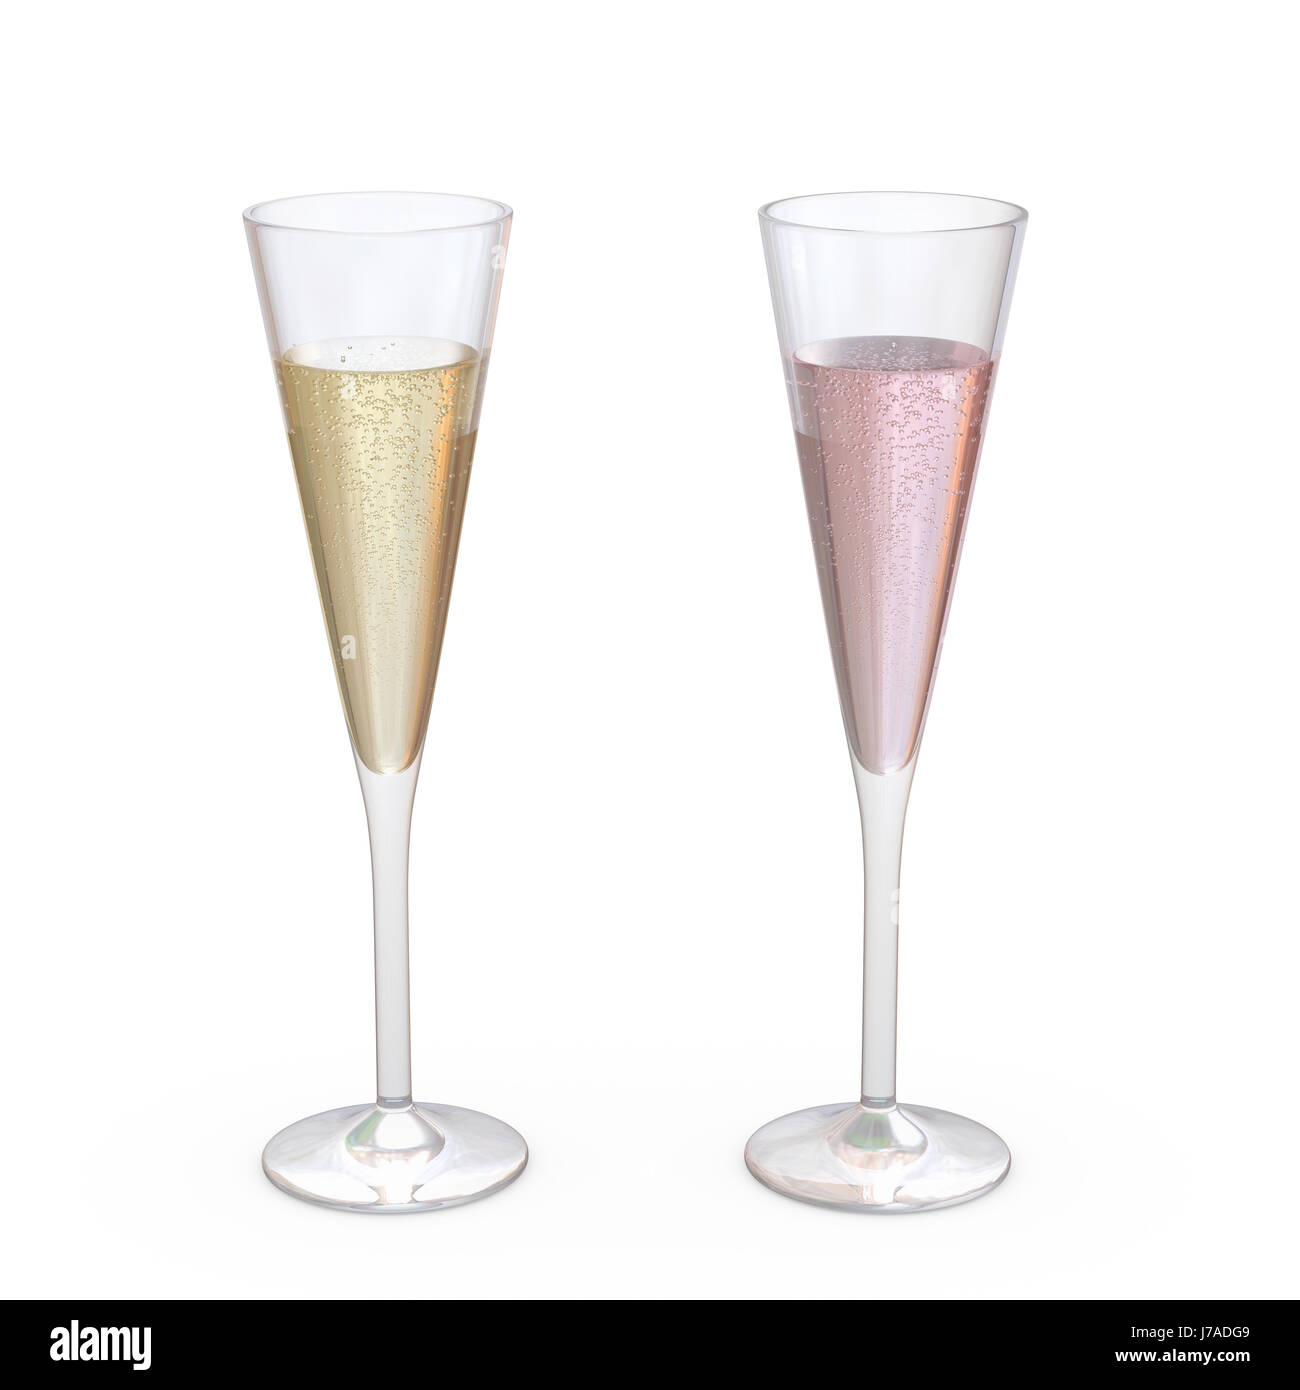 https://c8.alamy.com/comp/J7ADG9/champagne-trumpet-flutes-glasses-set-with-liquid-clipping-path-included-J7ADG9.jpg